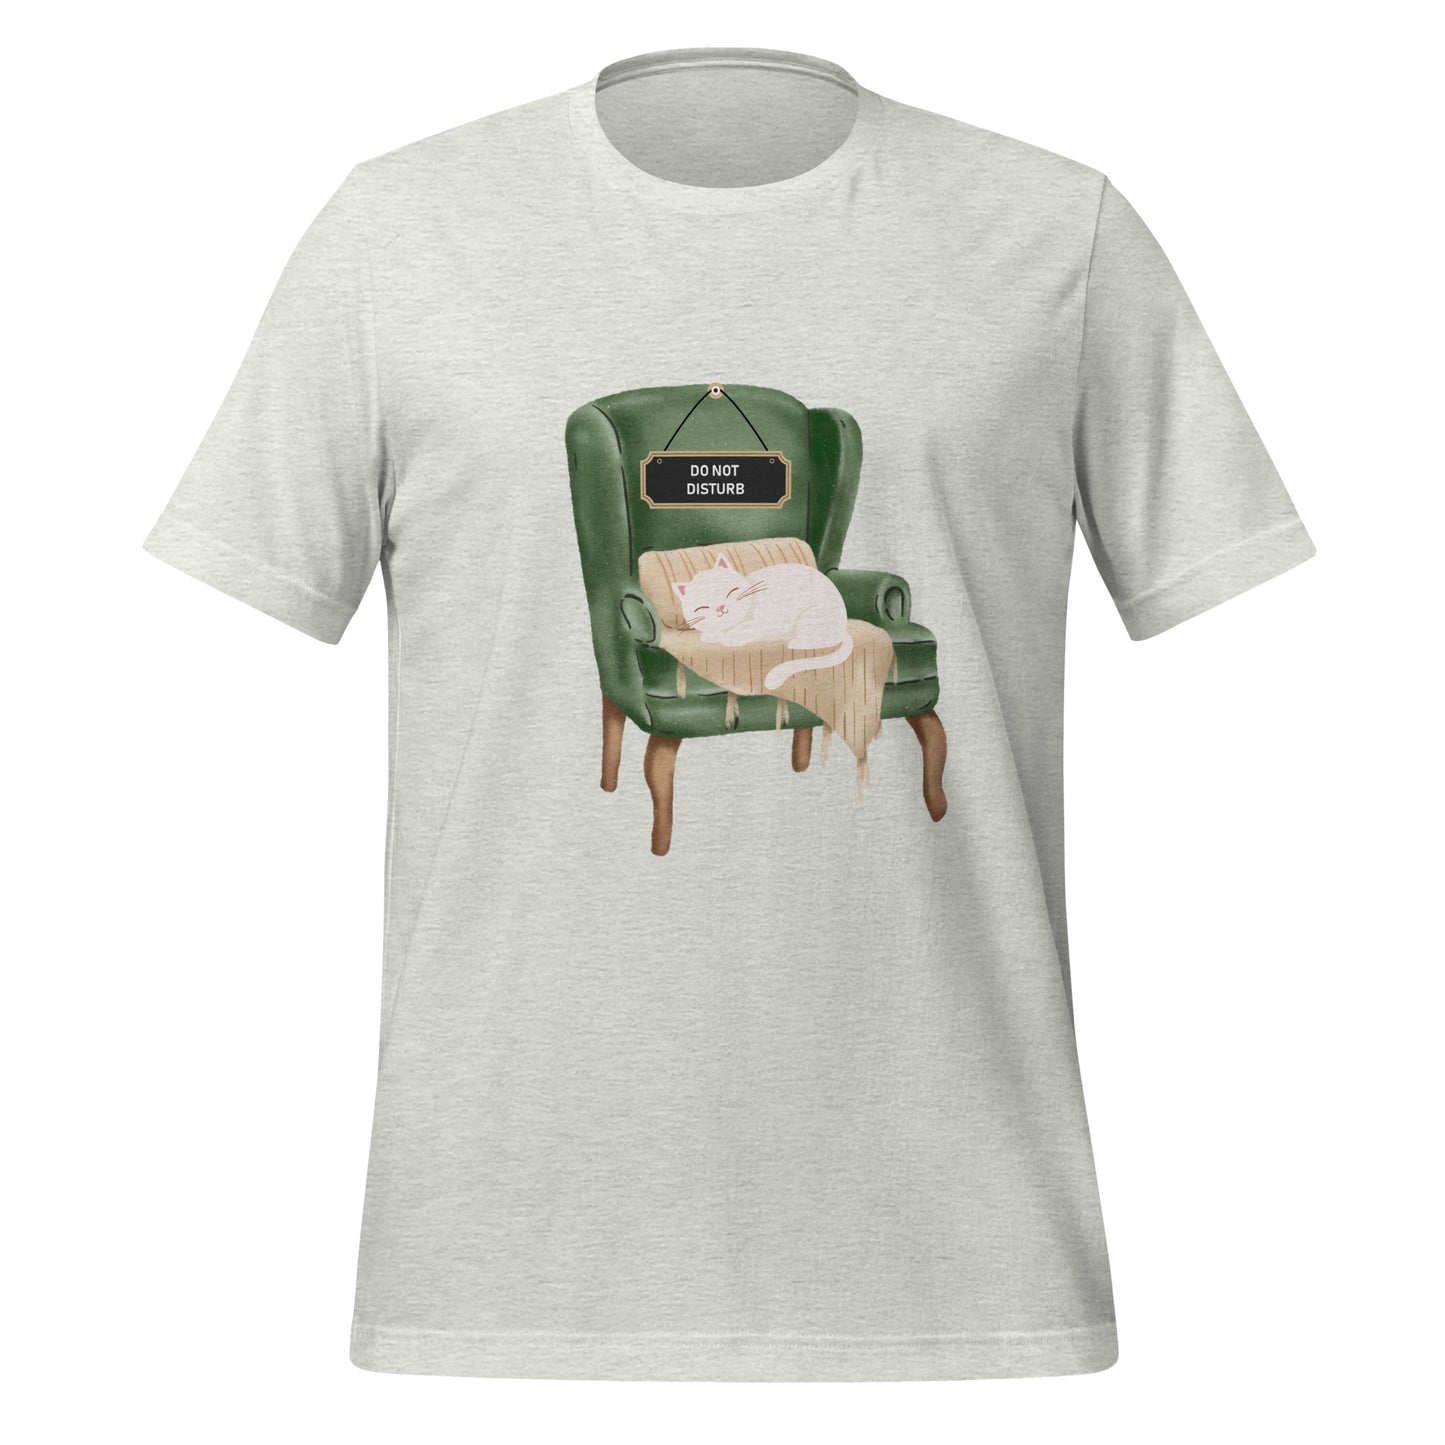 Cat, Funny, Sleeping, Dozing Off, Chair, Living Room, Unisex, Happy, Dreaming, Animal, T-shirt